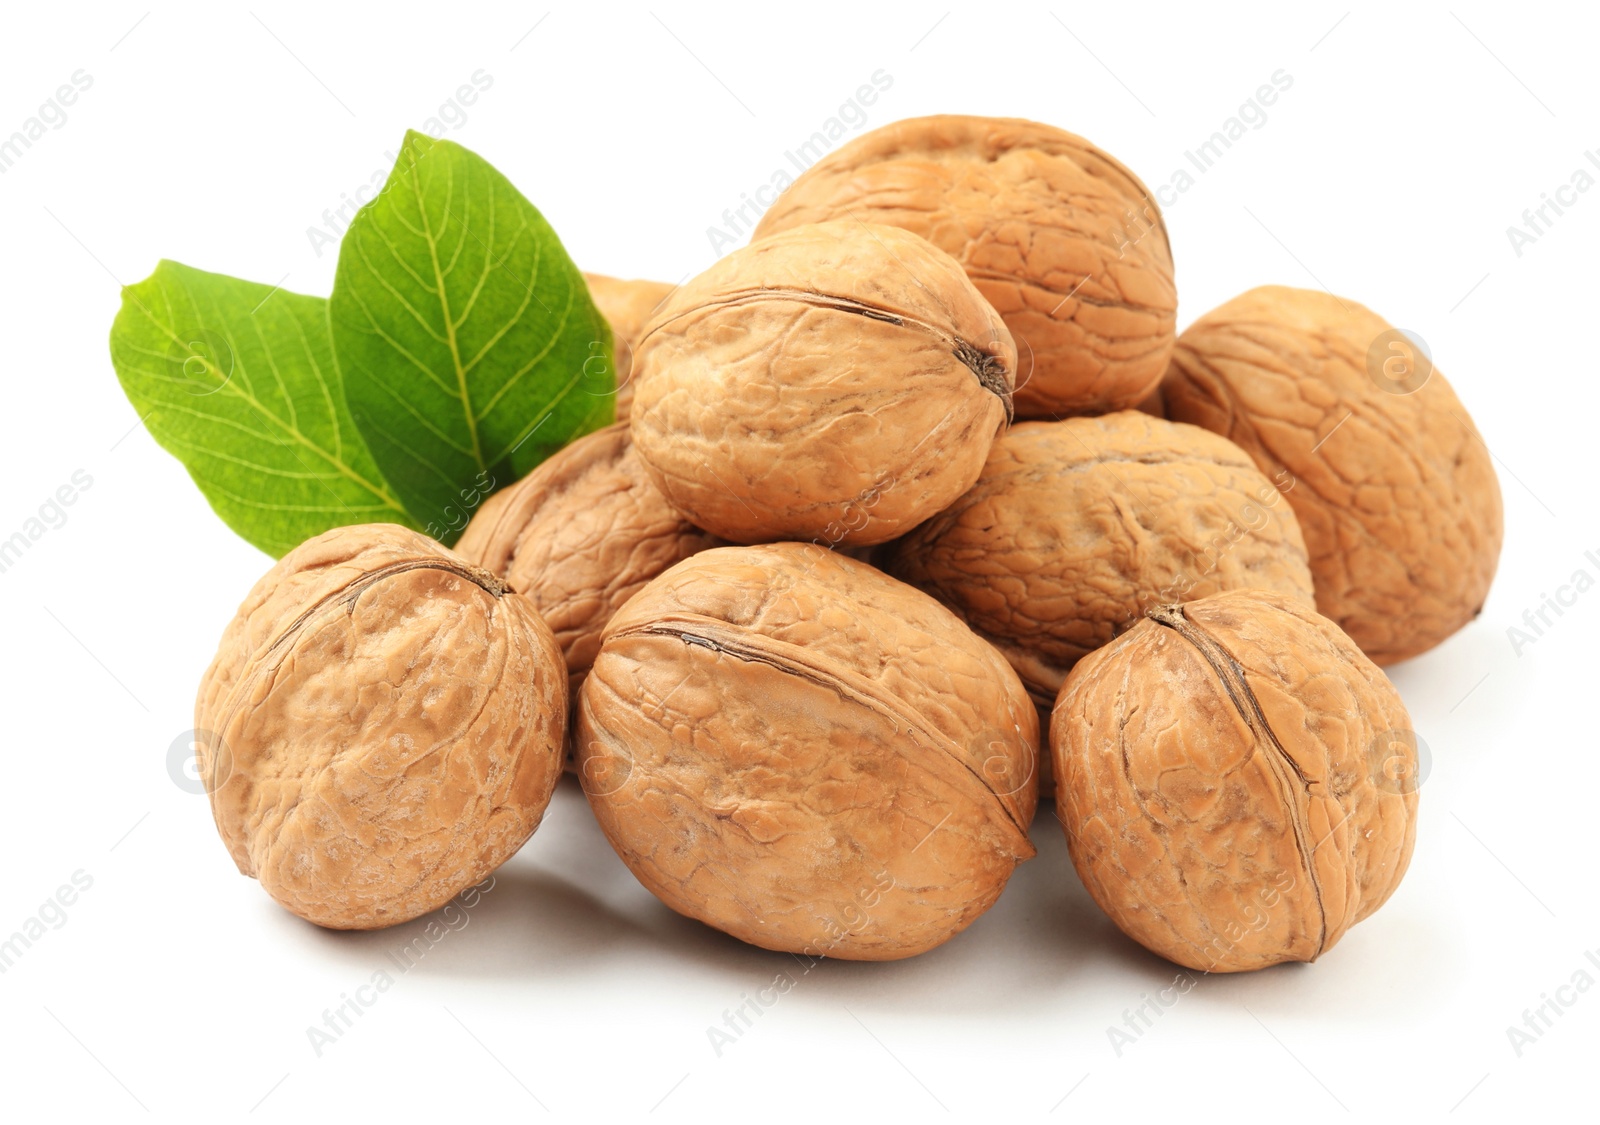 Photo of Whole walnuts in shell and leaves on white background